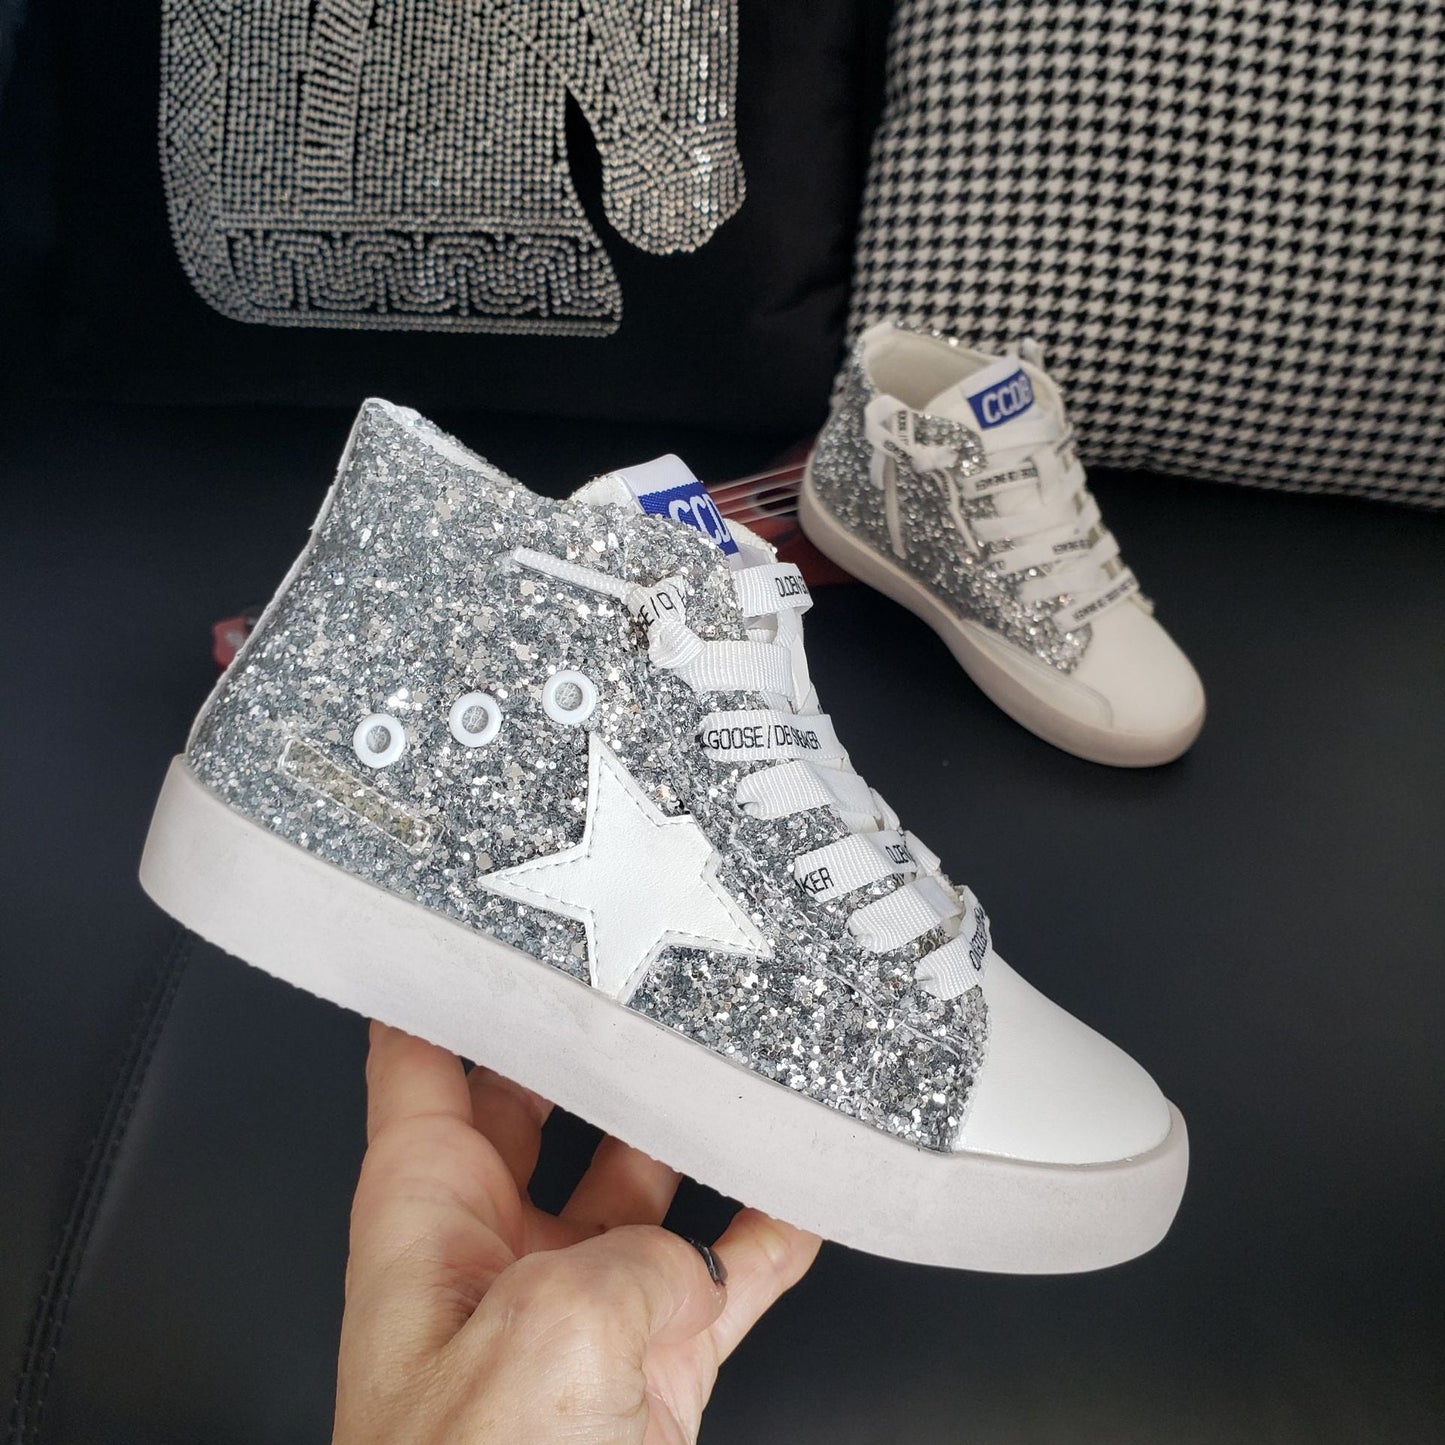 rts: High Top Star Sparkle and Leopard Tennis Shoe (high quality)-